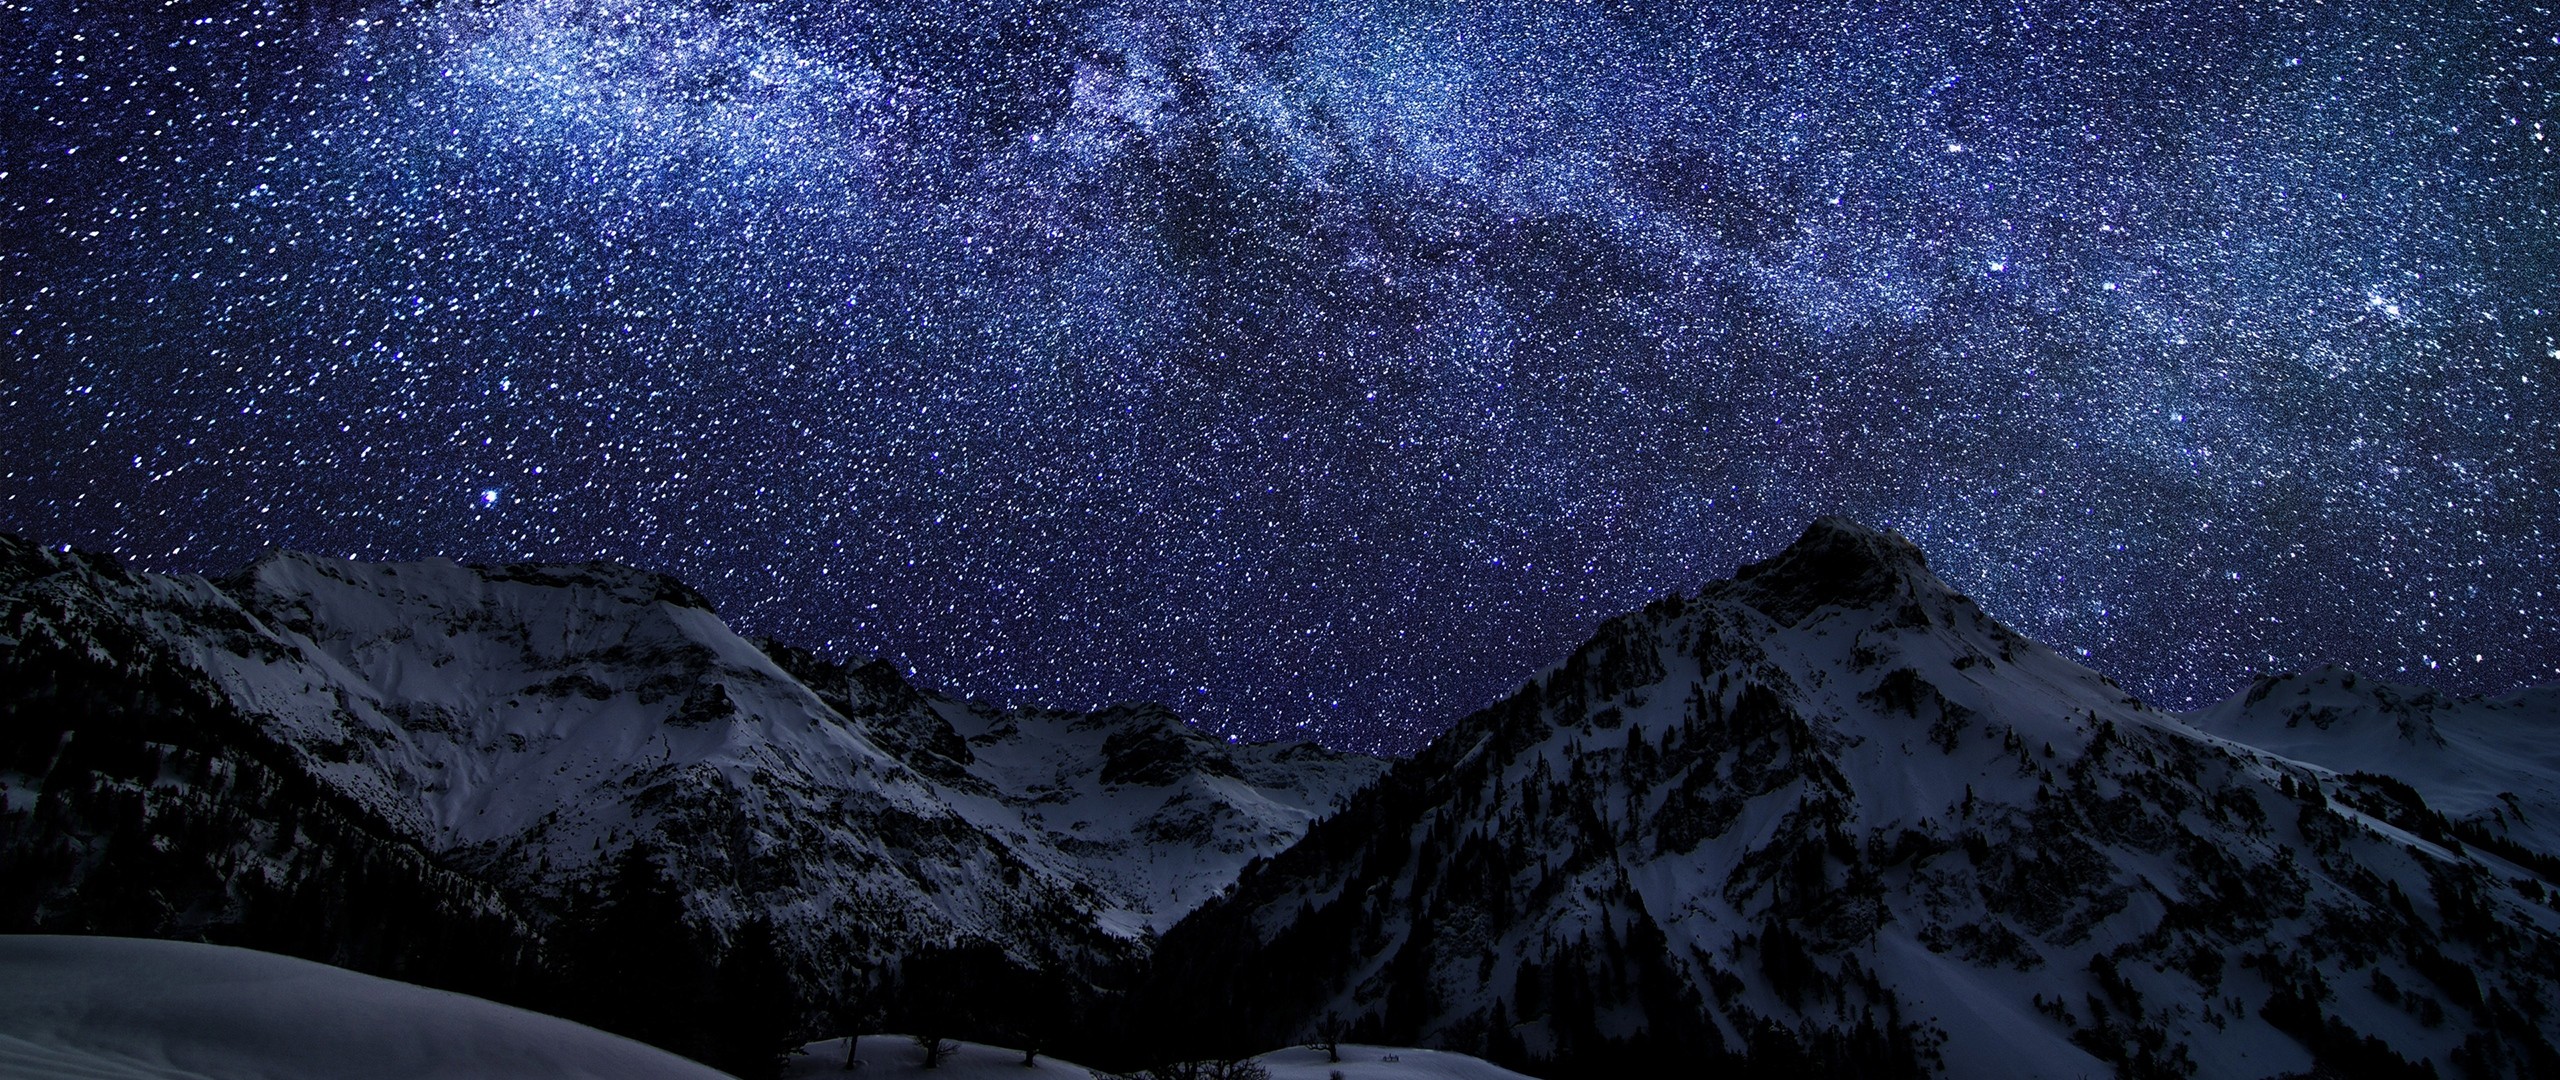 General 2560x1080 landscape nature skyscape starry night stars winter sky cold outdoors mountains snowy peak